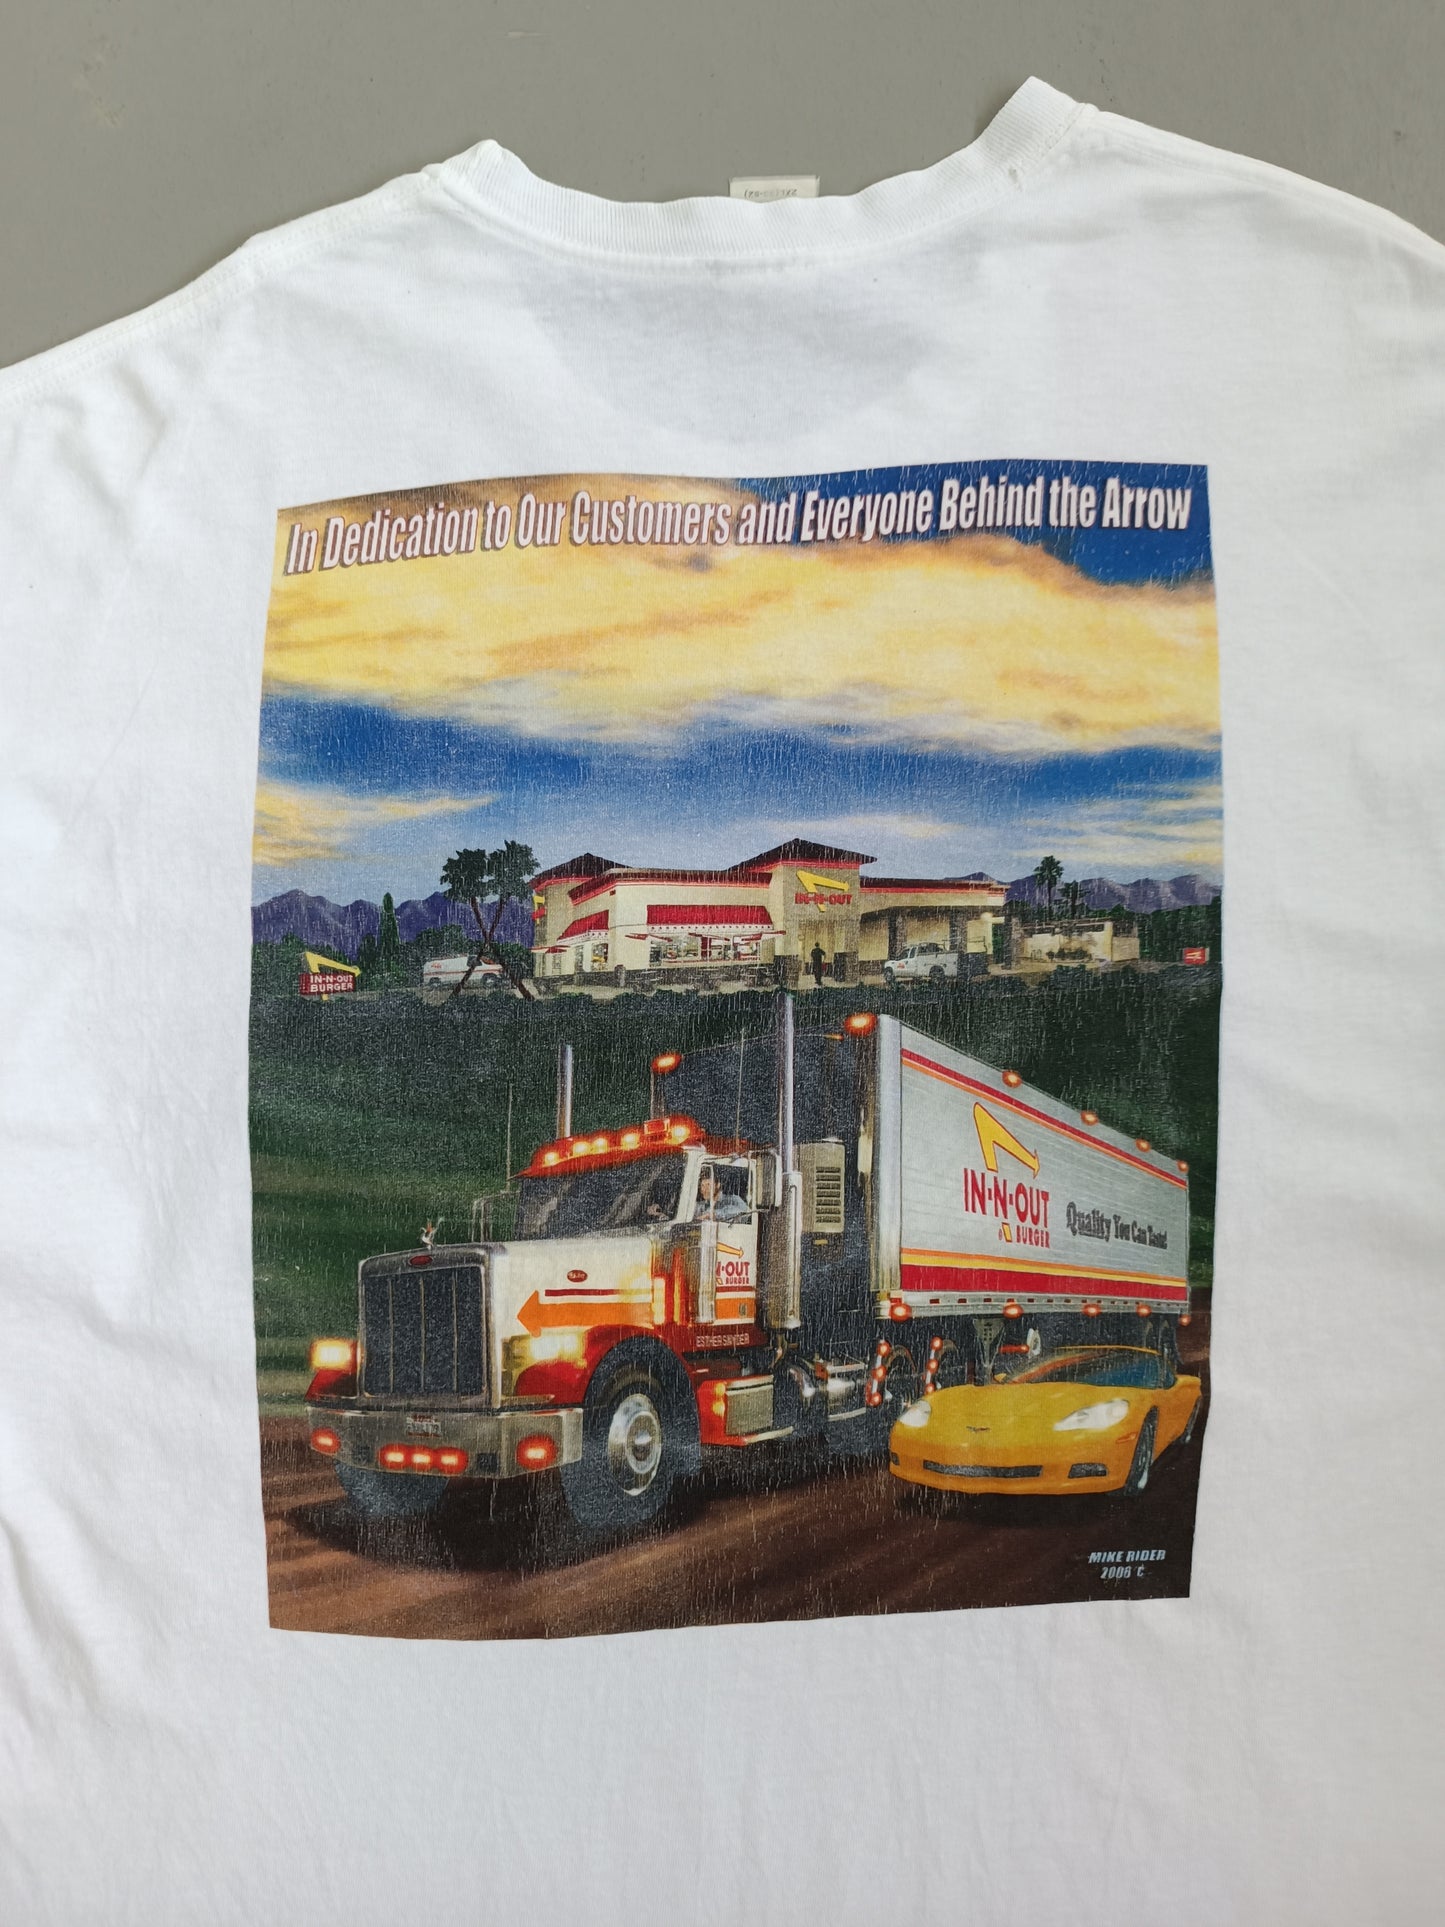 In and Out California - 2XL